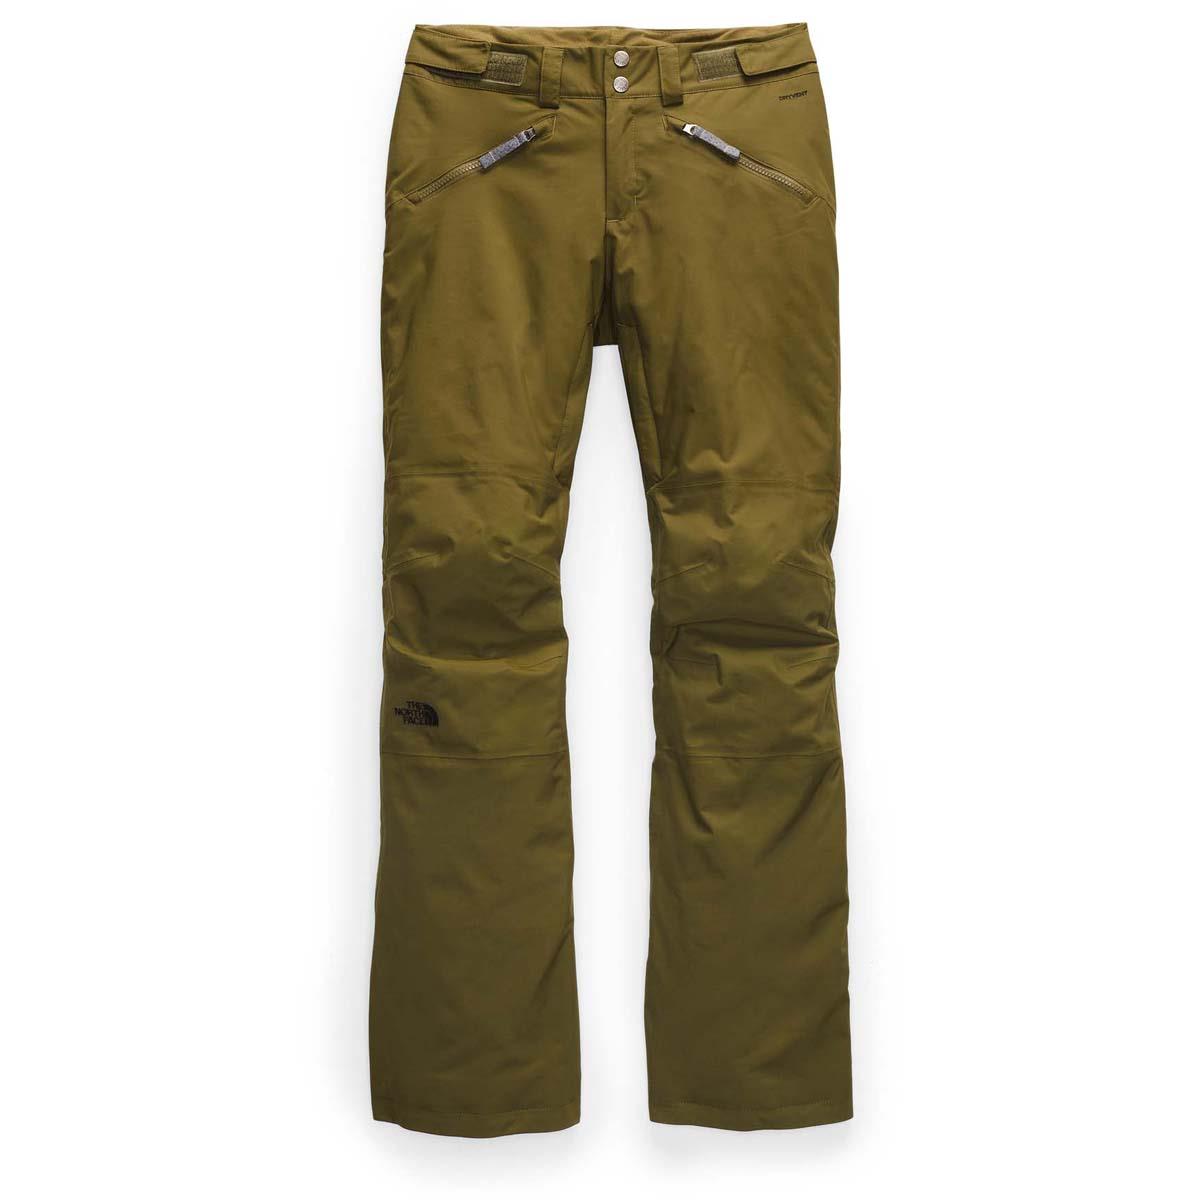 Women The North Face Aboutaday Pant - NF0A3M5K | Buckmans.com